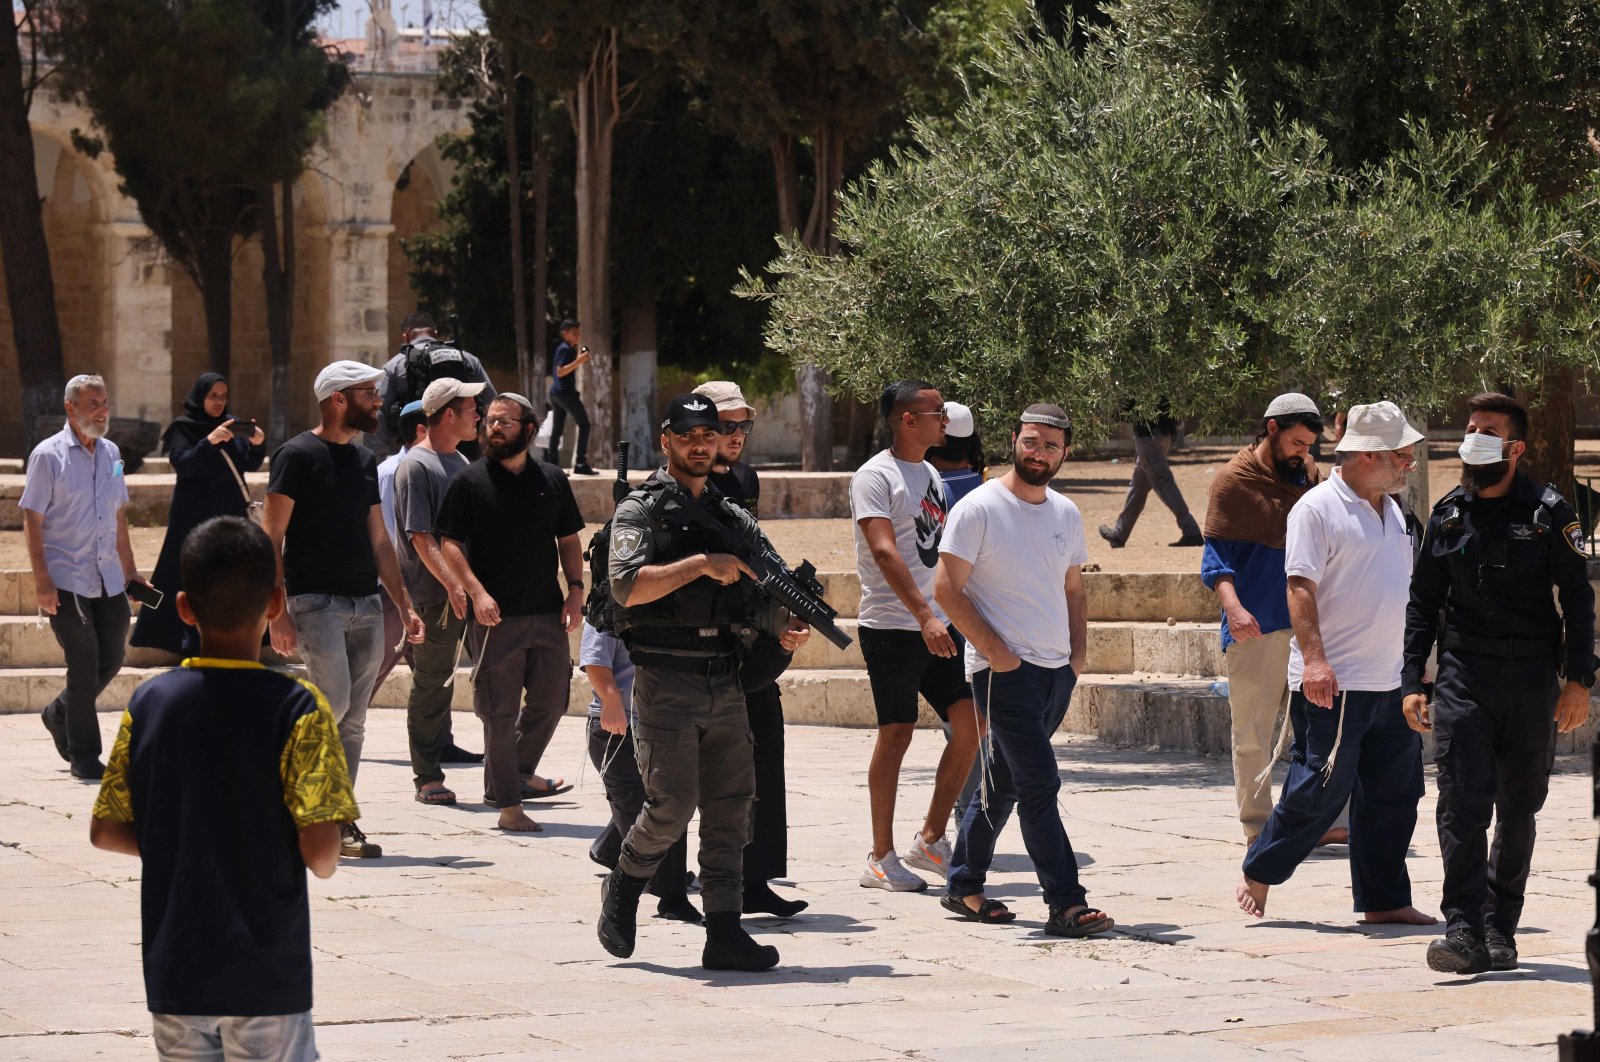 Members of the Israeli security forces stand guard, as a group of Orthodox Jews enter the Al-Aqsa mosque compound in Jerusalem, July 18, 2021. (AFP Photo)